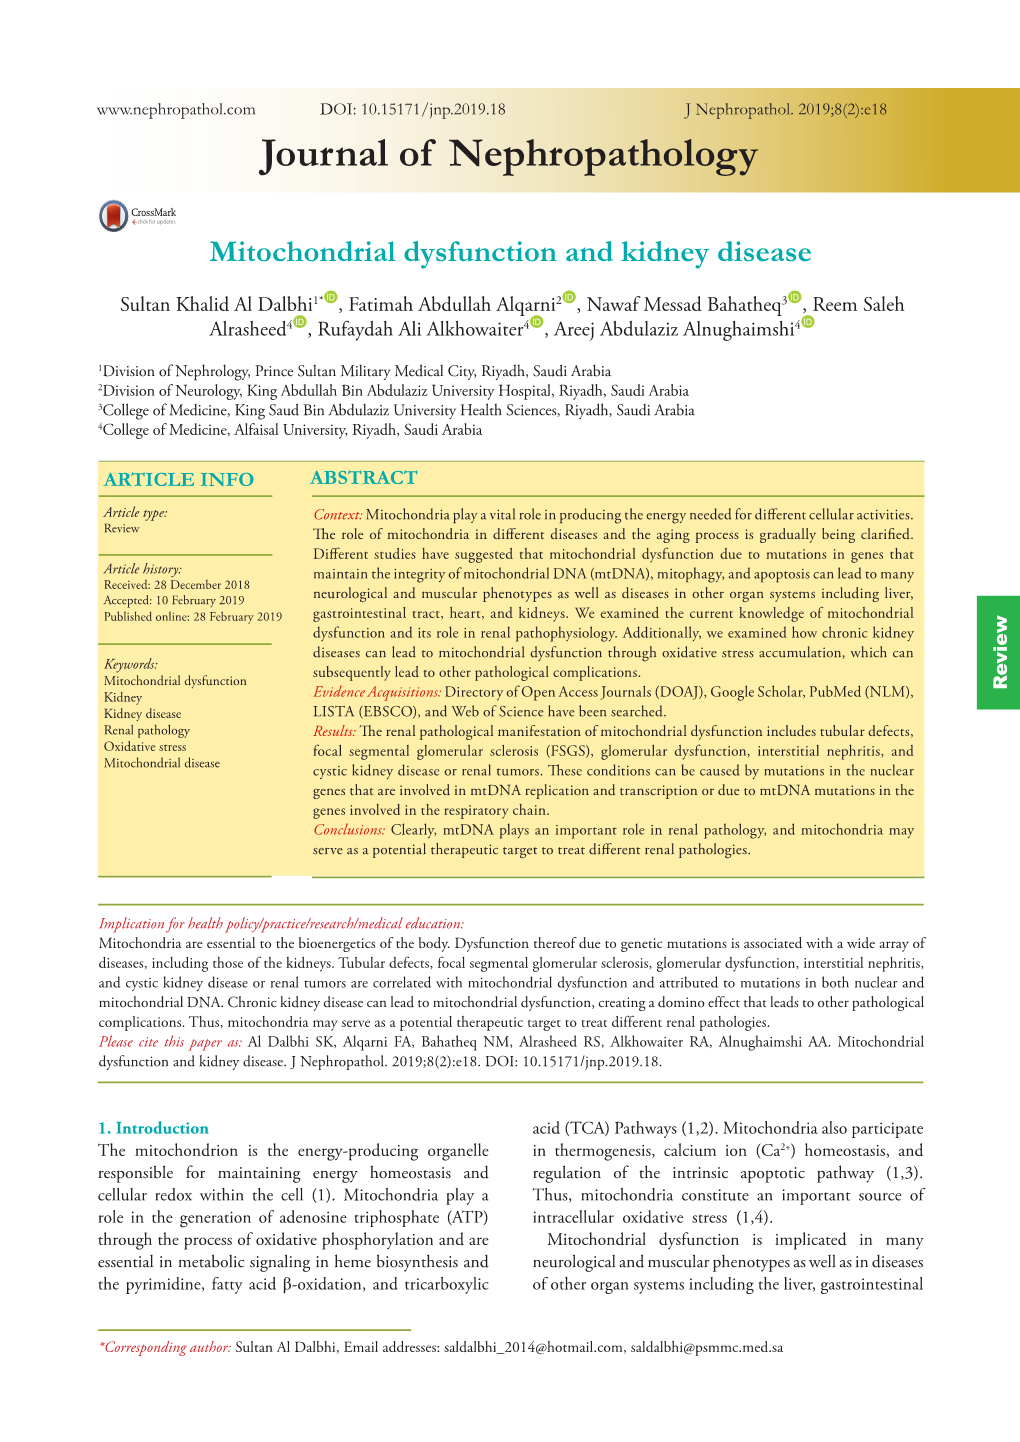 Mitochondrial Dysfunction and Kidney Disease